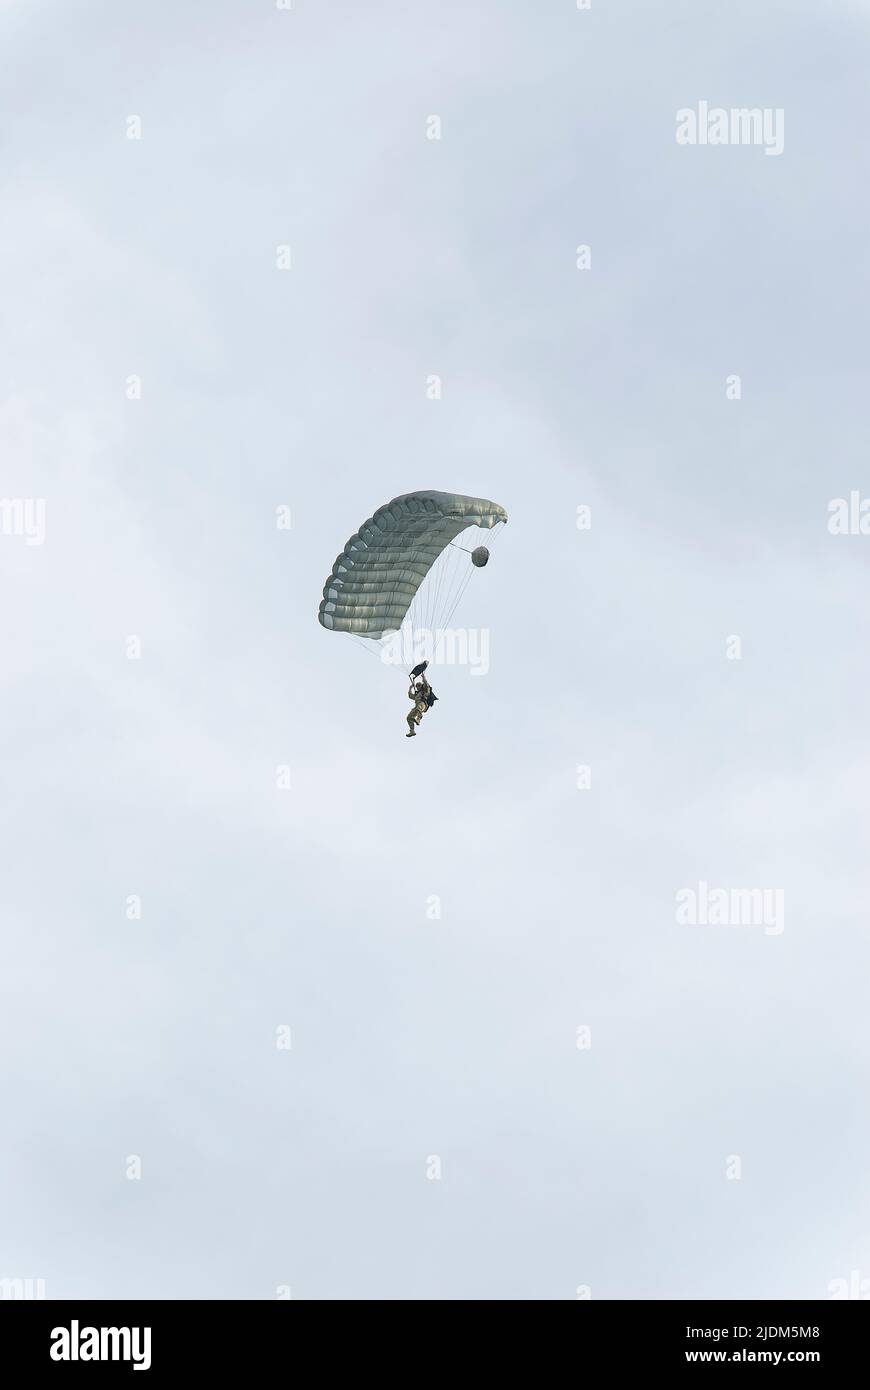 Lonely paratrooper. Photo taken during the parachute jumping show during the Commando Fest in Dziwnów - August 2020. Stock Photo